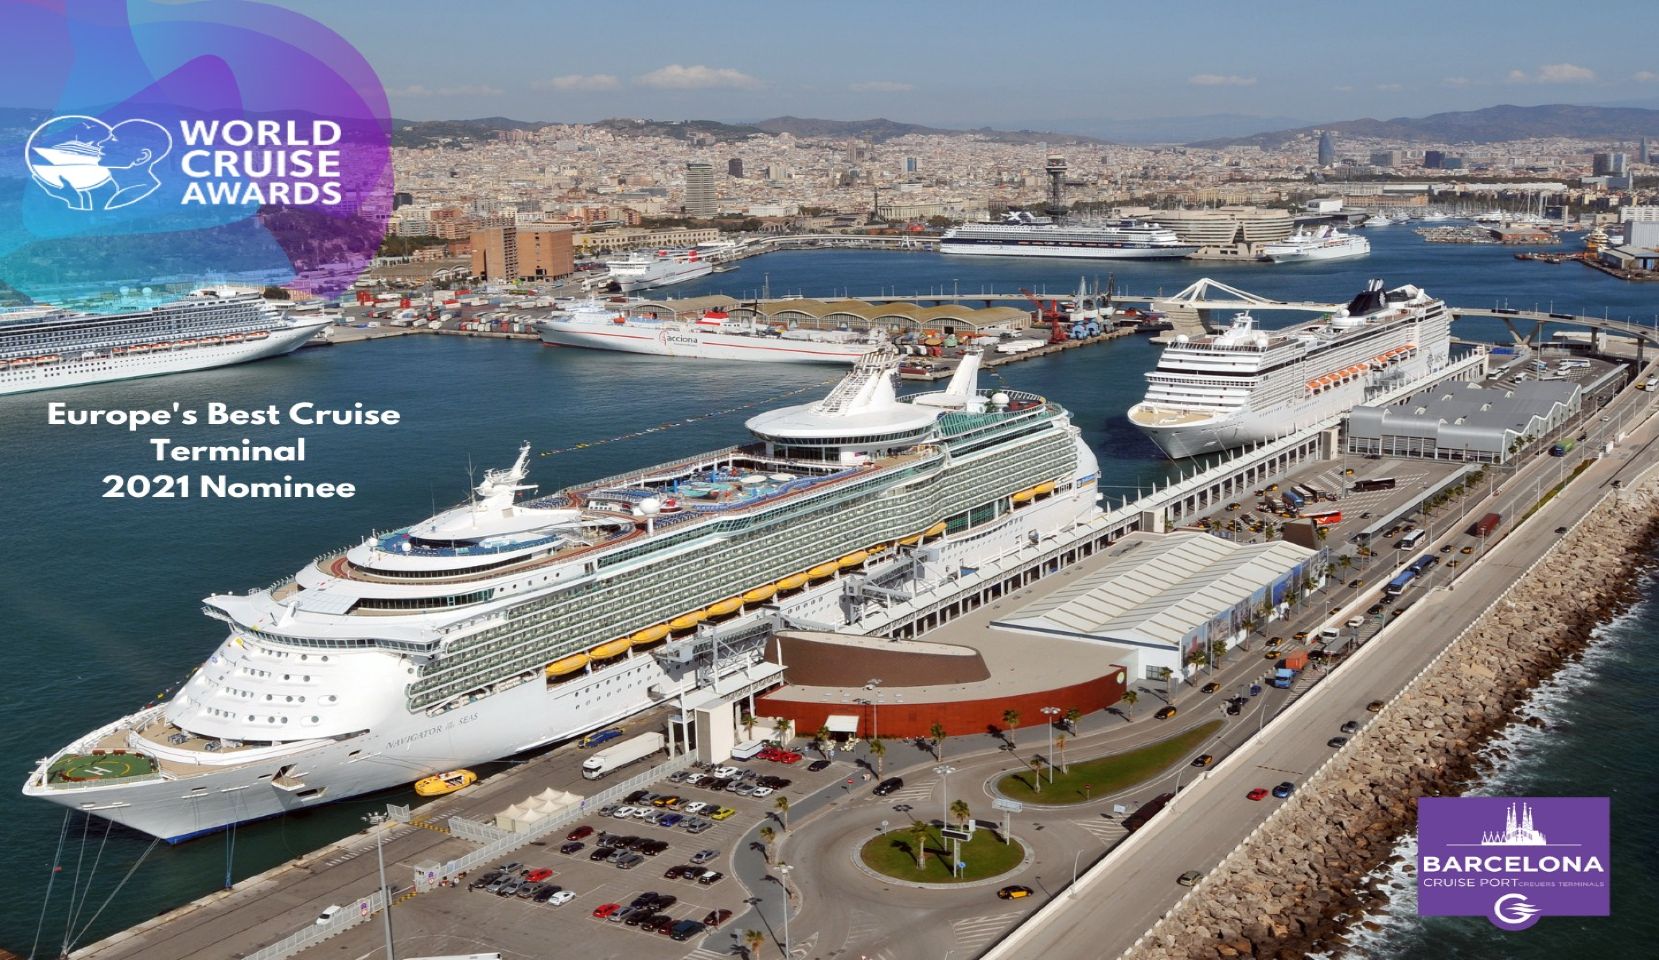 Barcelona Cruise Port nomination for Europe’s best cruise terminal 2021